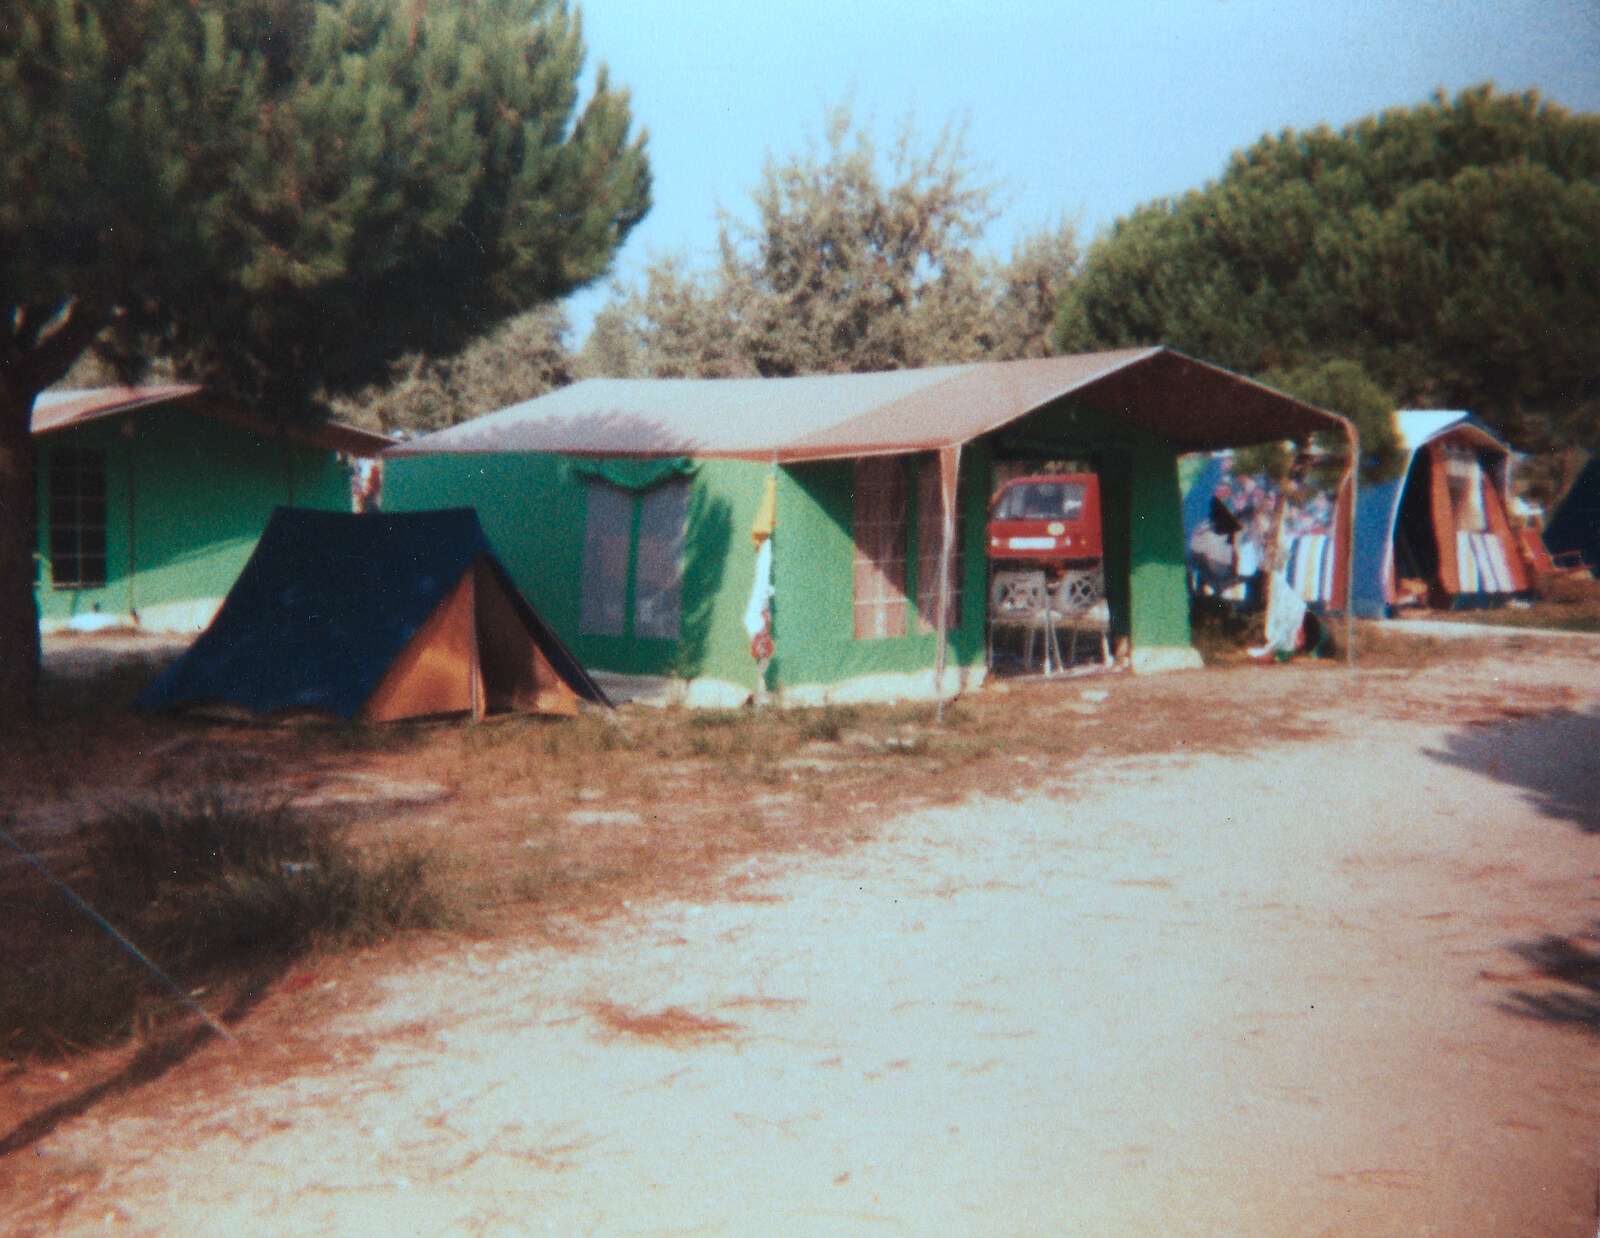 Nosher and Sean's extra tent from Camping with Sean, The Camargue, South of France, 15th July 1982